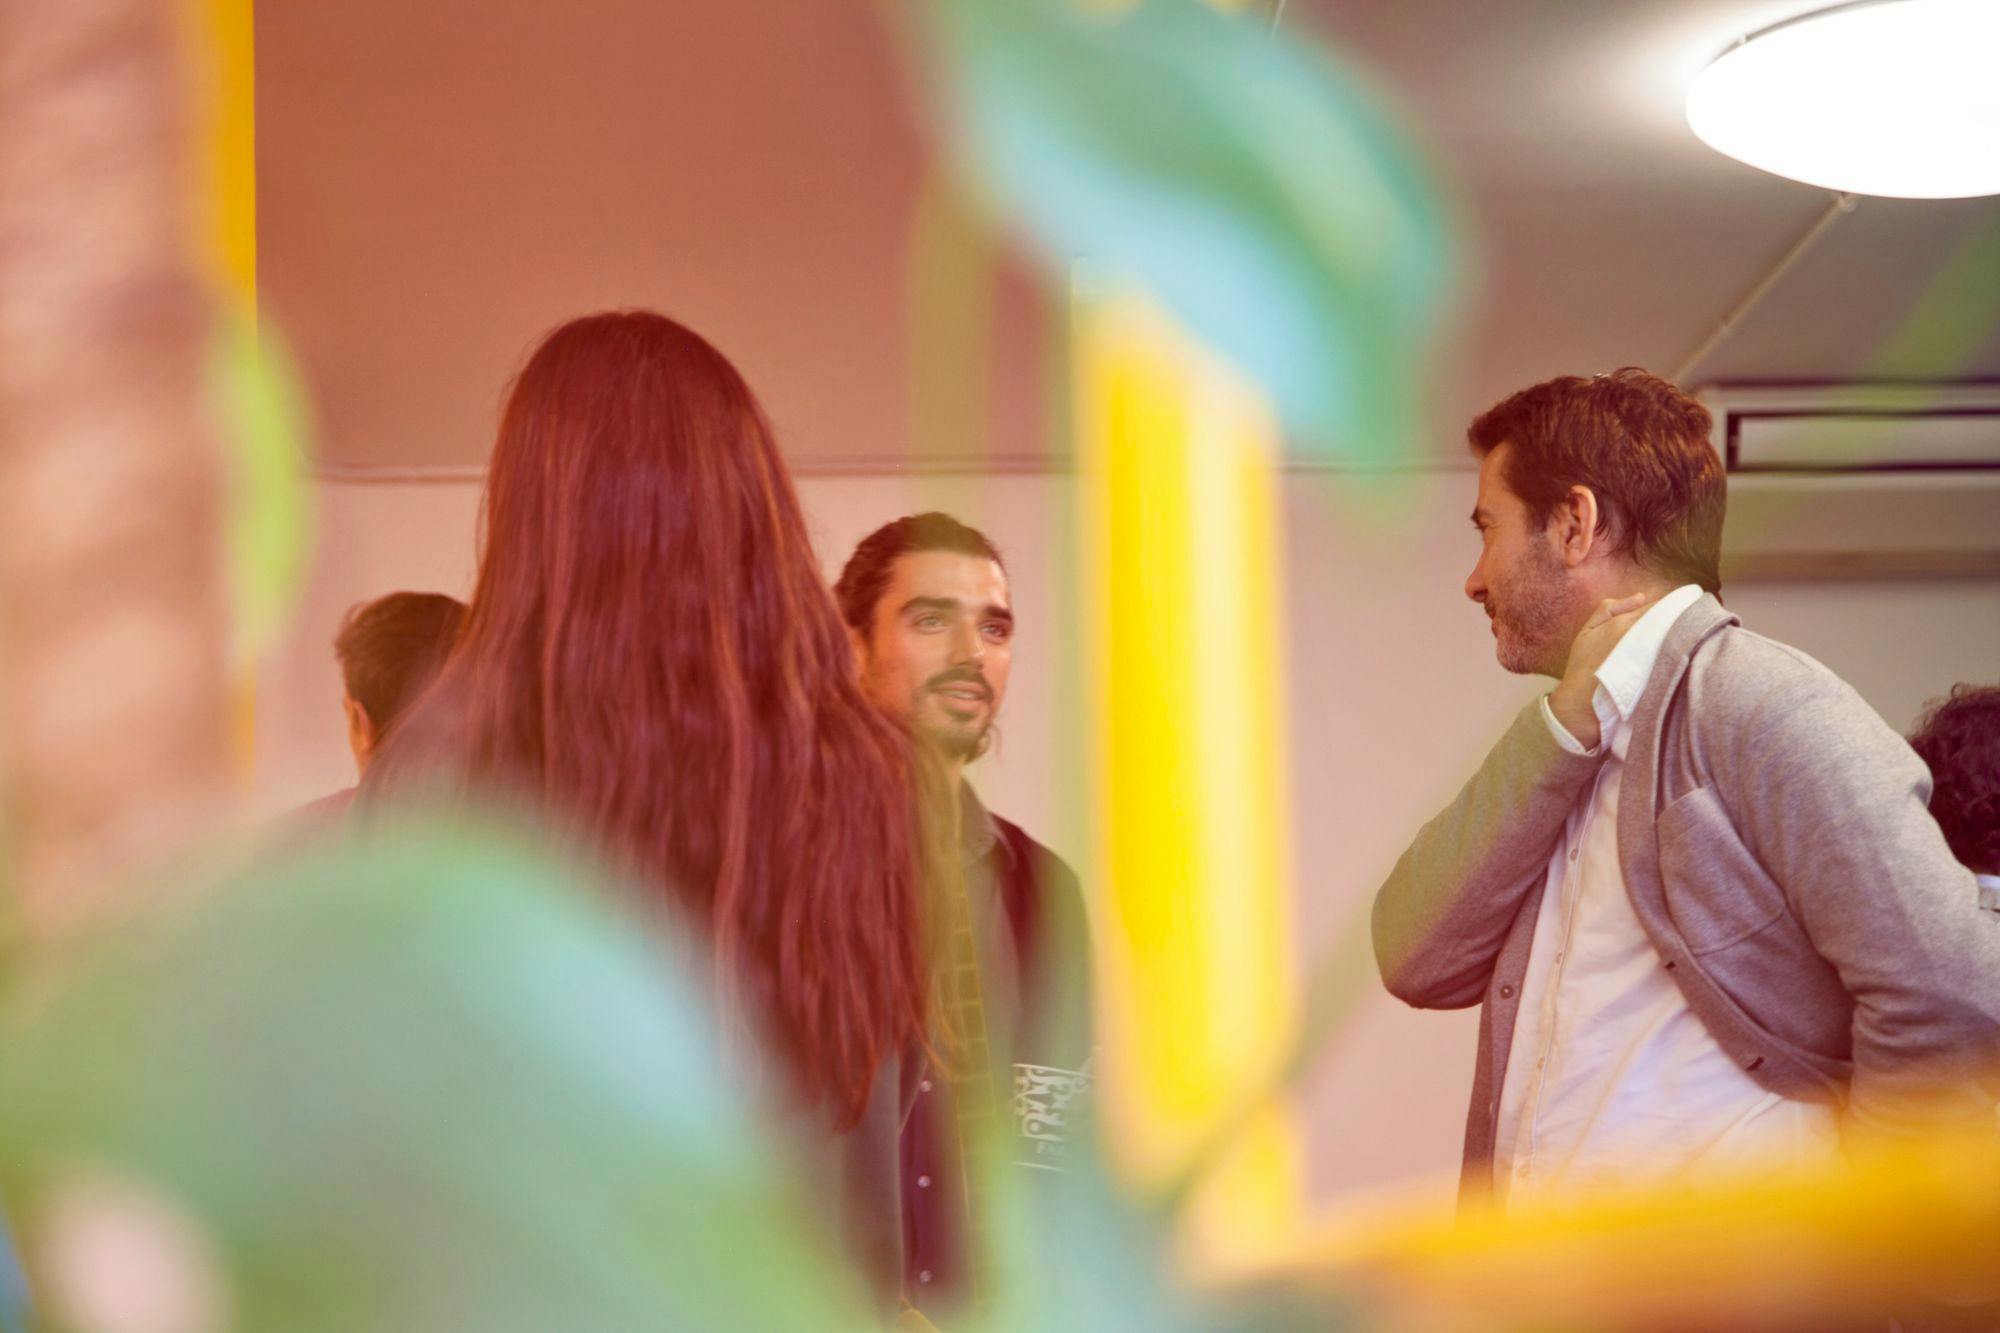 How to Network like a Pro, According to WeWork Labs Members Who are Expert Networkers